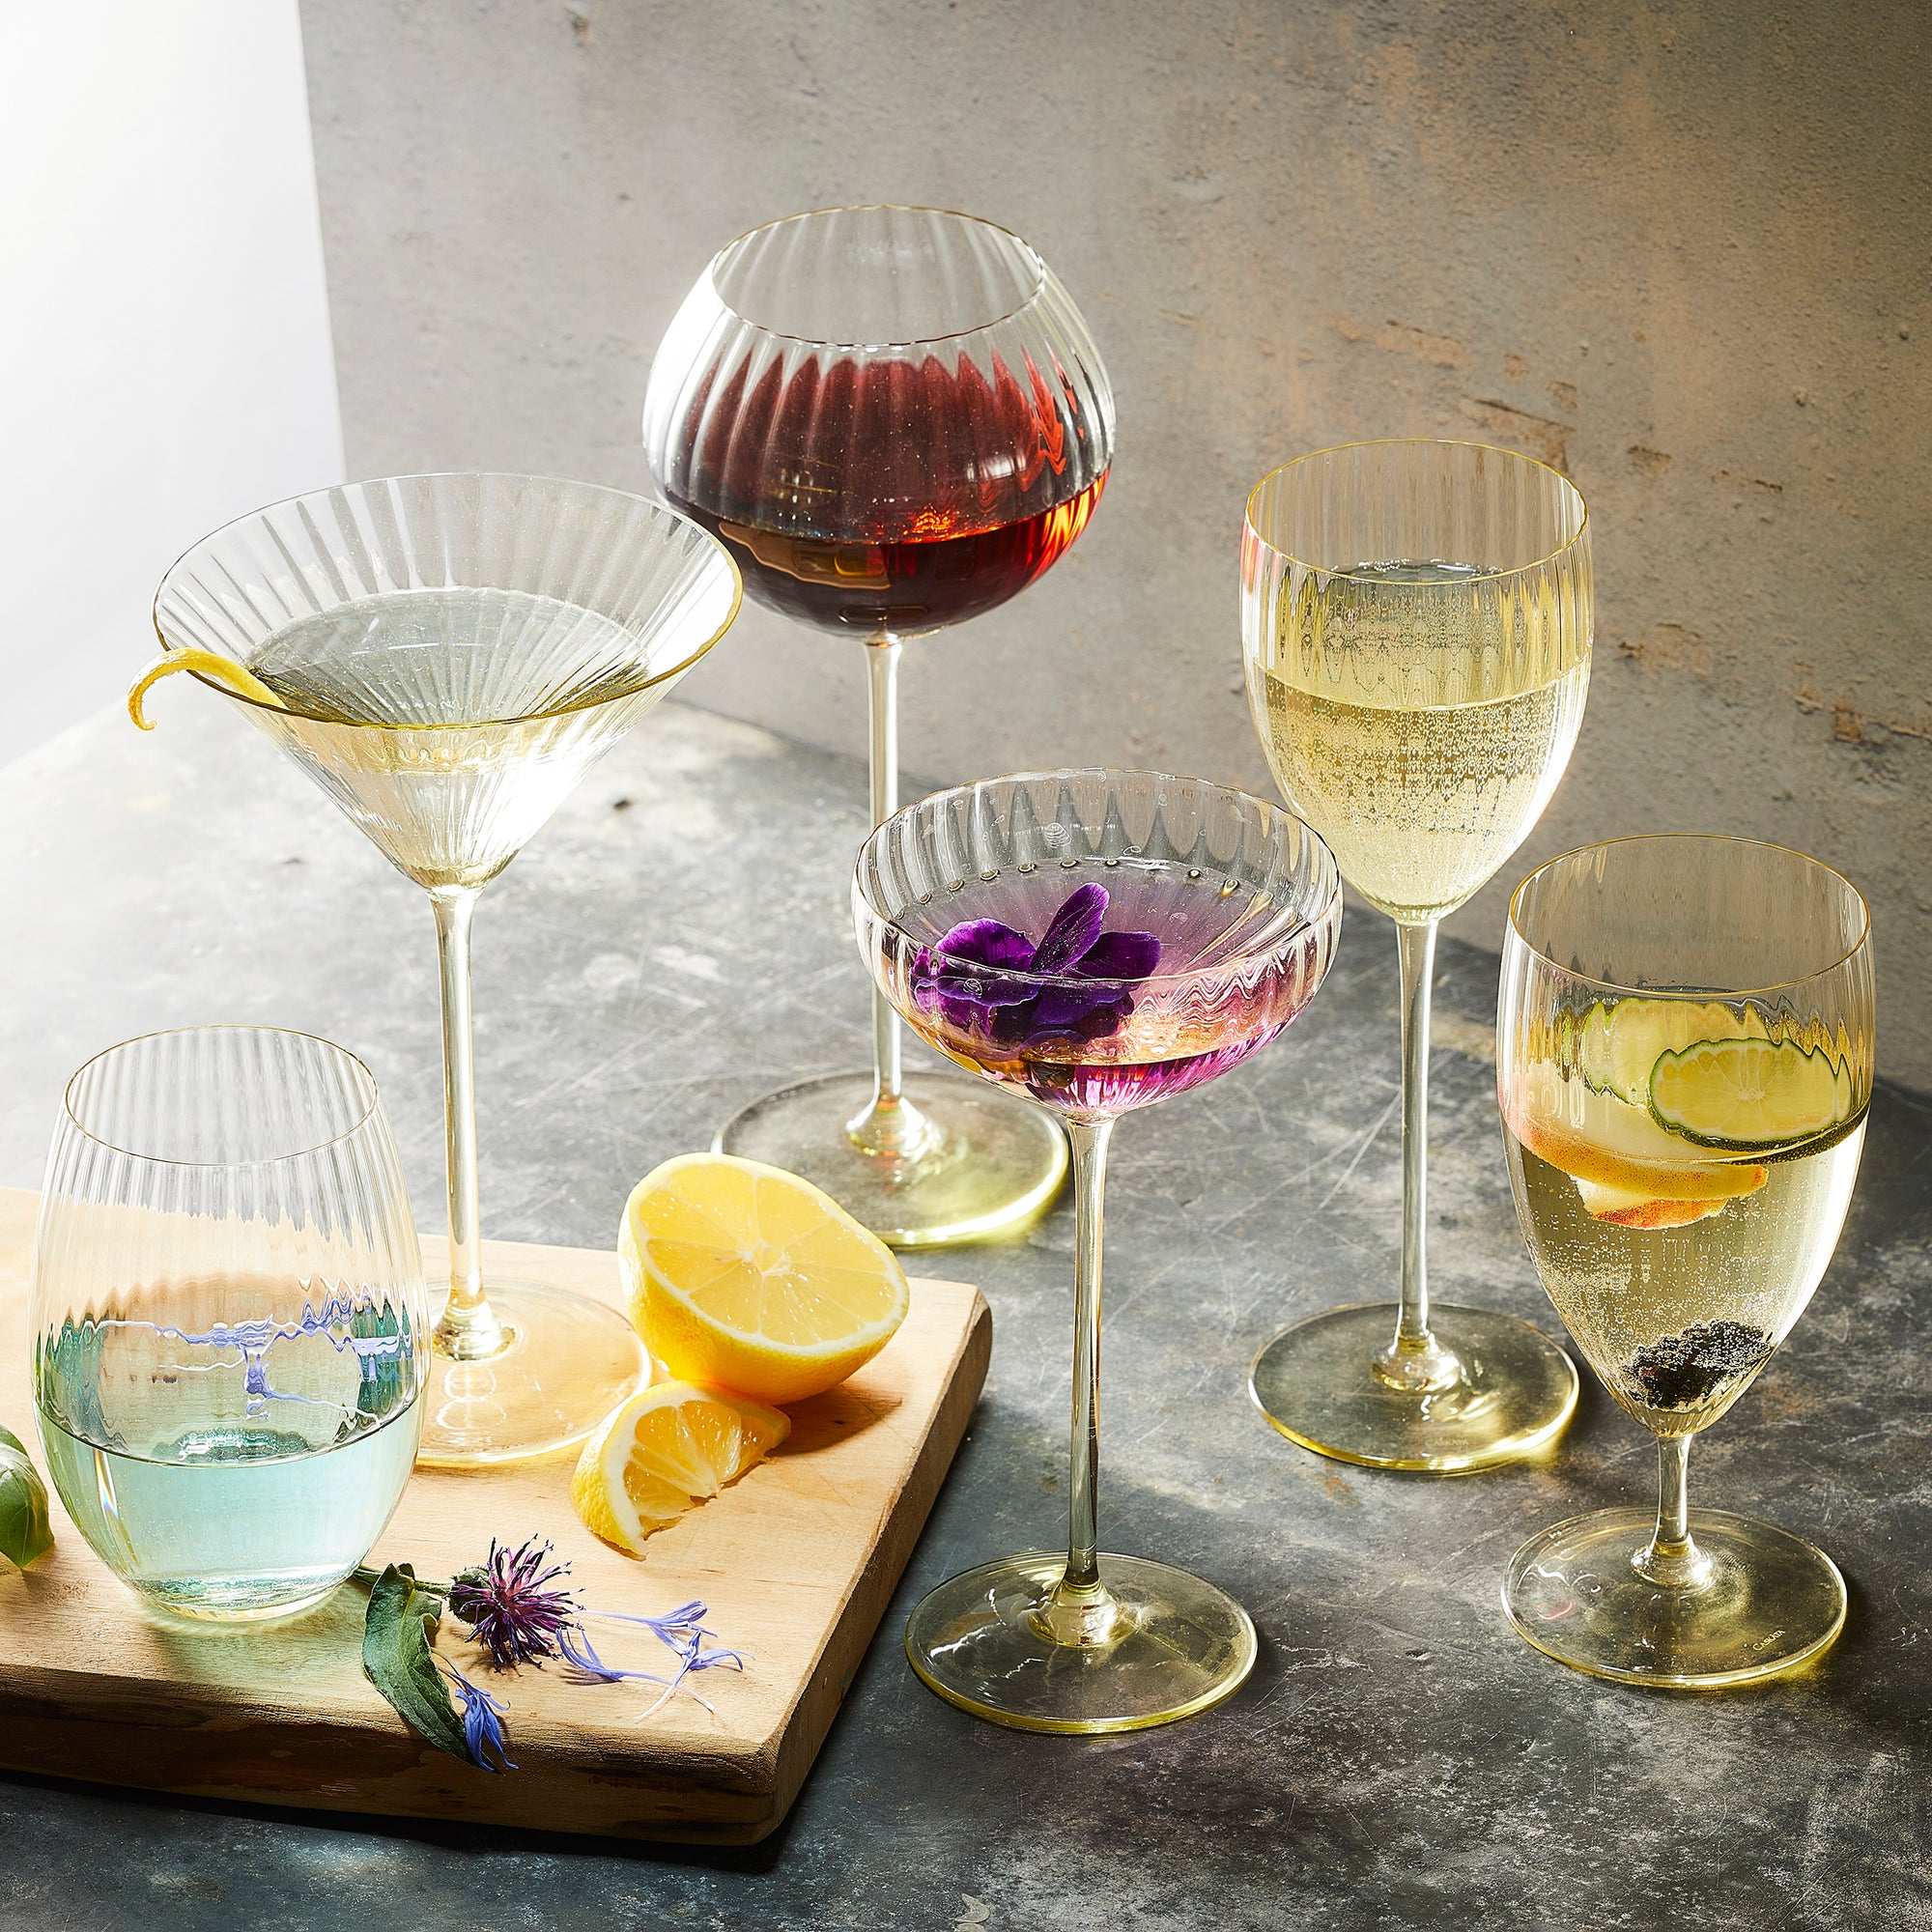 Quinn Collection of mouth-blown Crystal Stemware from Caskata available in 7 different colors